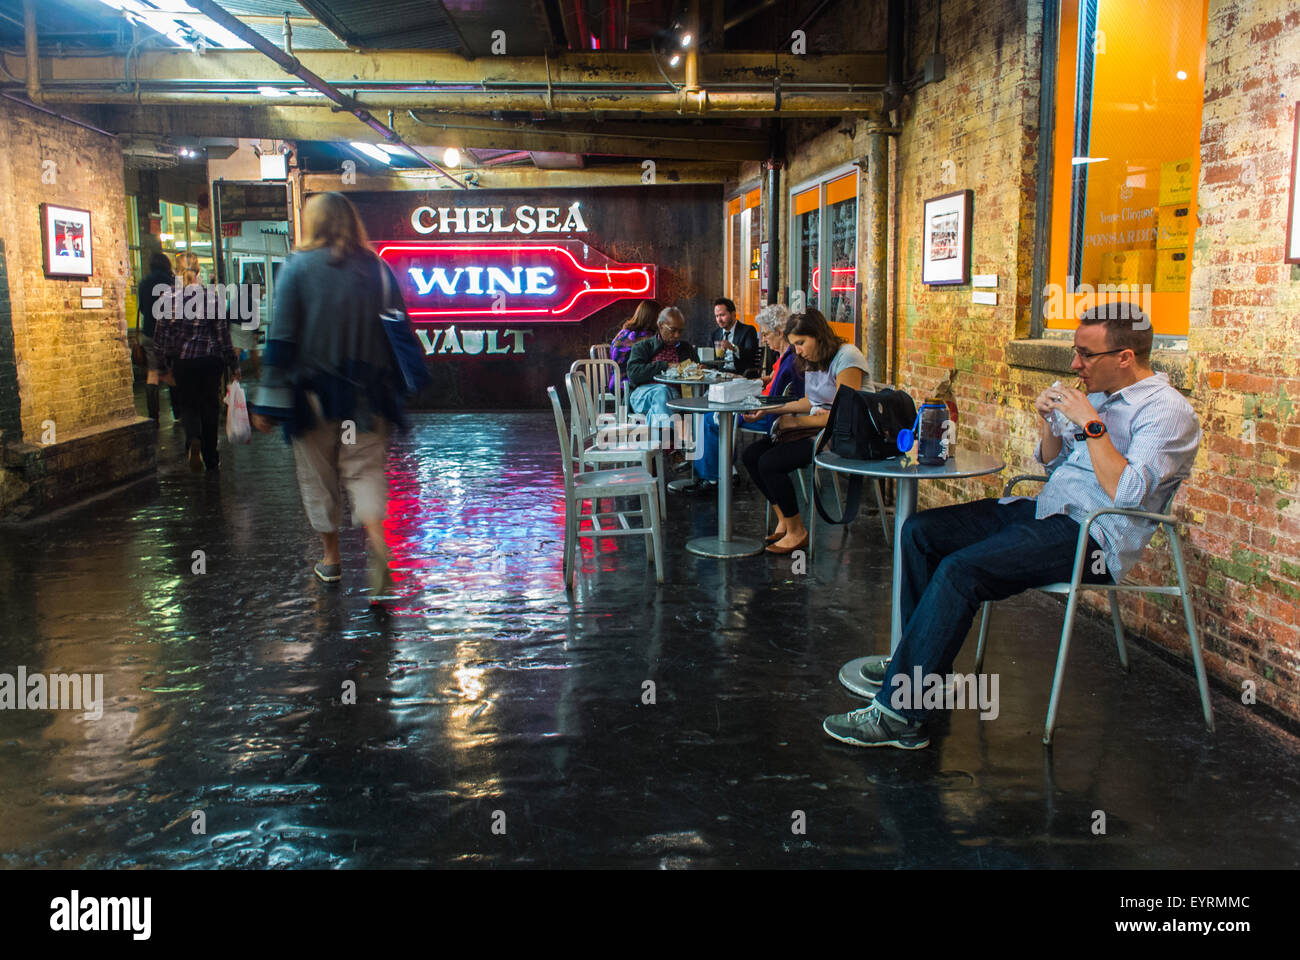 New York City, USA, Crowd People sitting at tables in American Café, Inside Public Food Market, Chelsea Market, Chelsea Wine Store Stock Photo